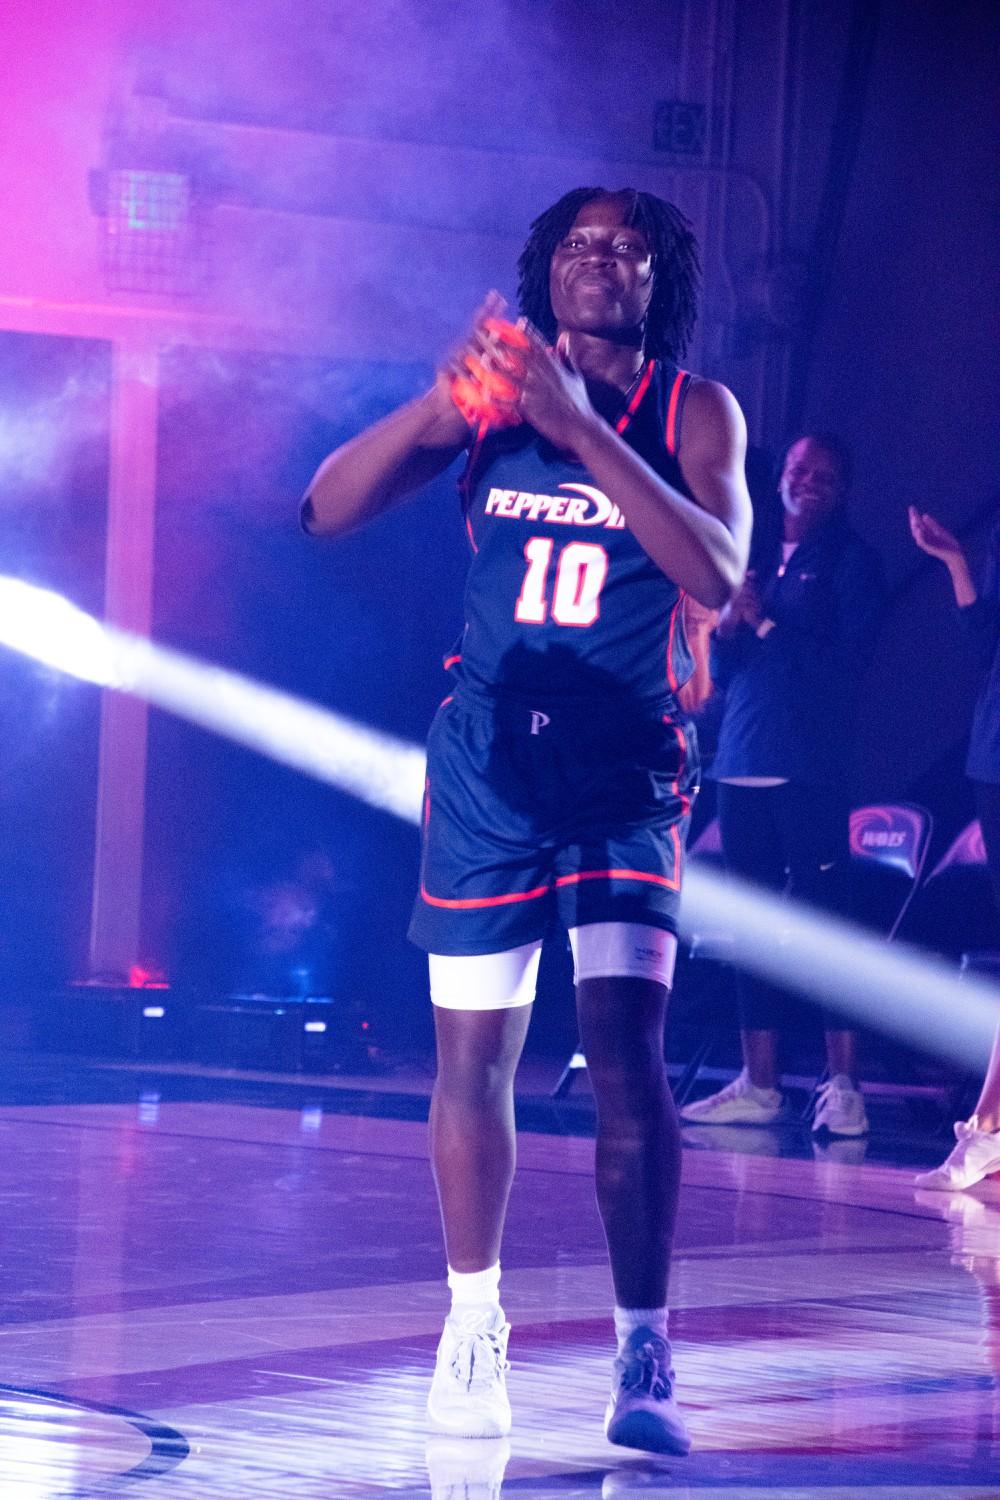 Senior guard Jane Nwaba is introduced to the court, getting ready to throw a free T-shirt to a lucky fan in the stands. Blue and Orange Madness begins with each team's introductions, which sets the tone for the rest of the night. Photo by Perse Klopp